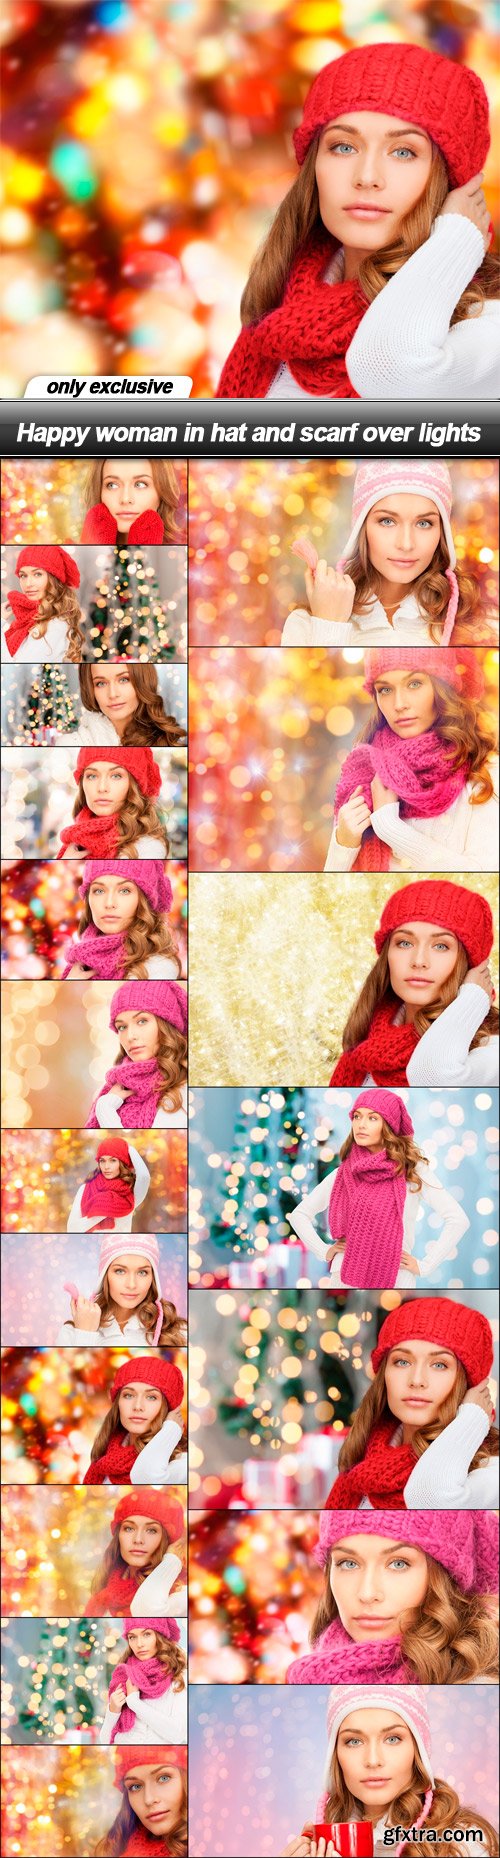 Happy woman in hat and scarf over lights - 19 UHQ JPEG